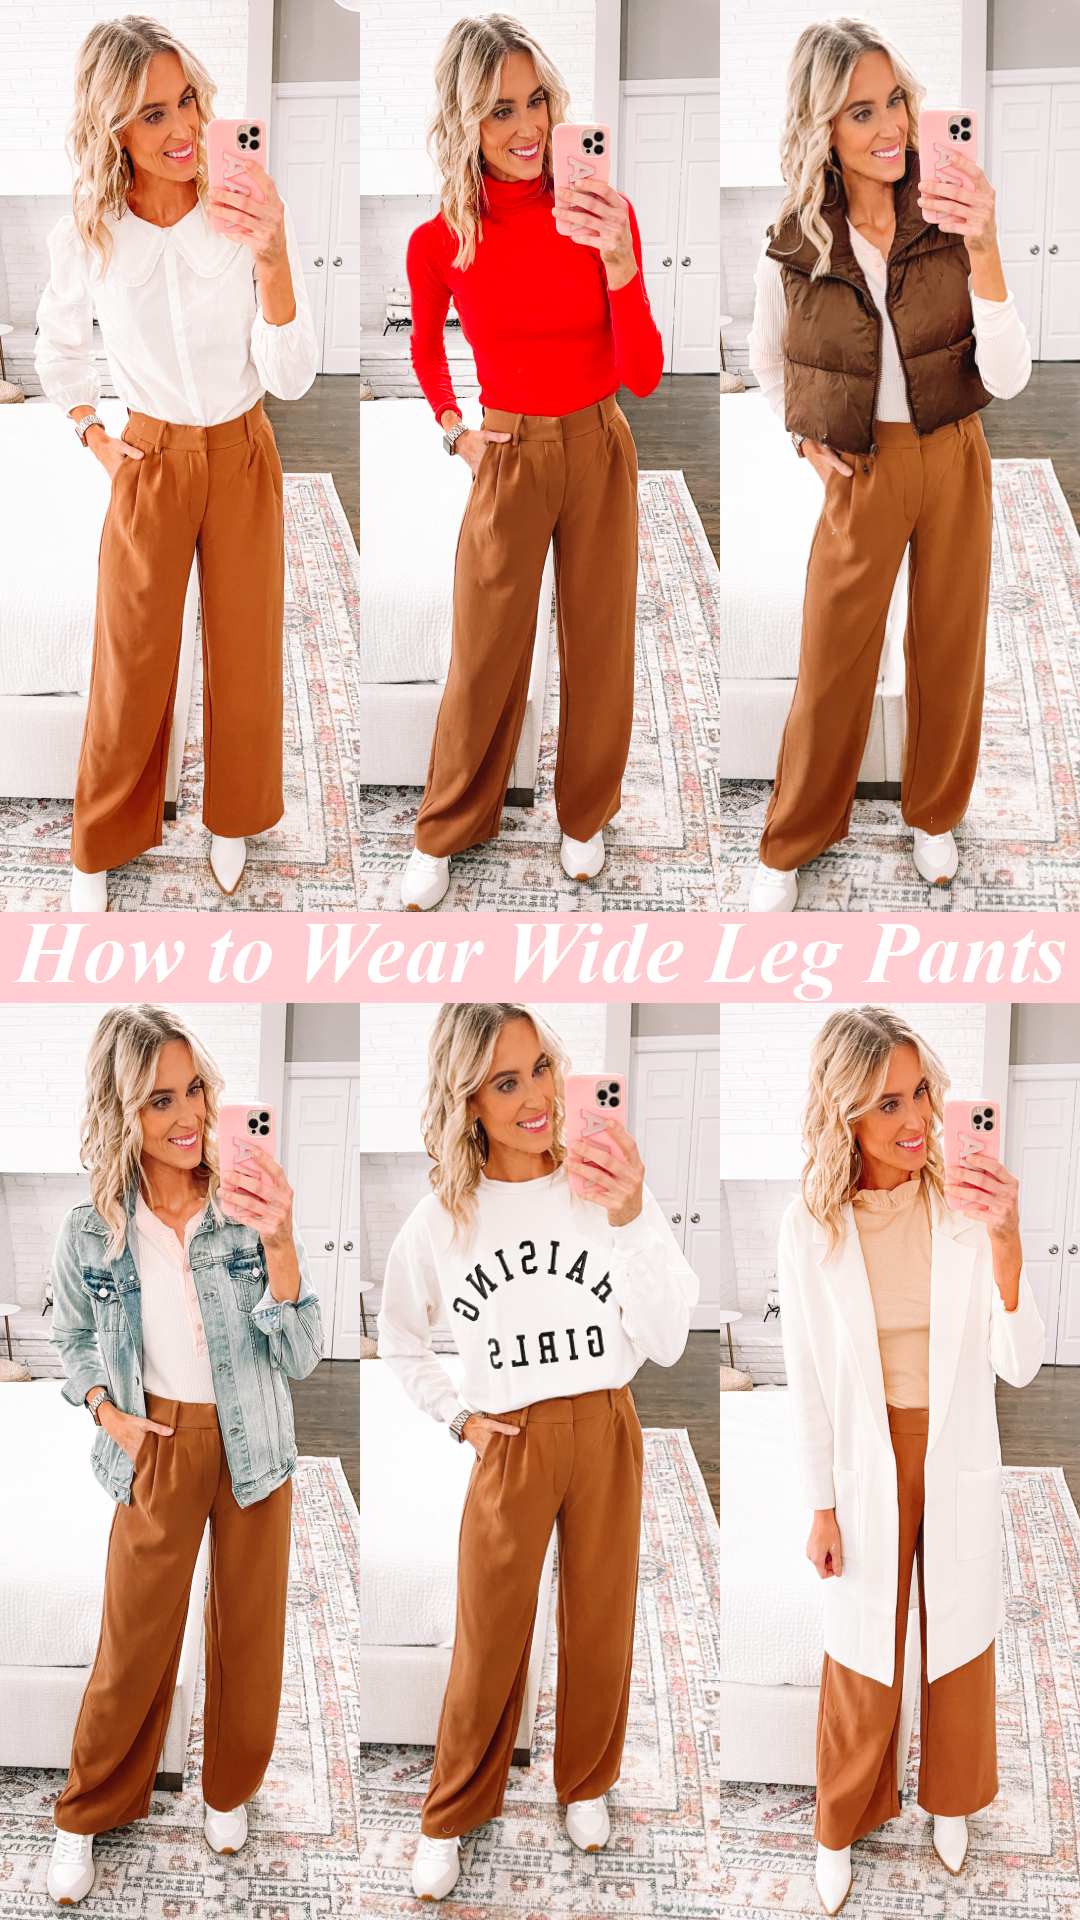 12 Women's Formal Wear Pants Deserving a Place in Any Work Capsule